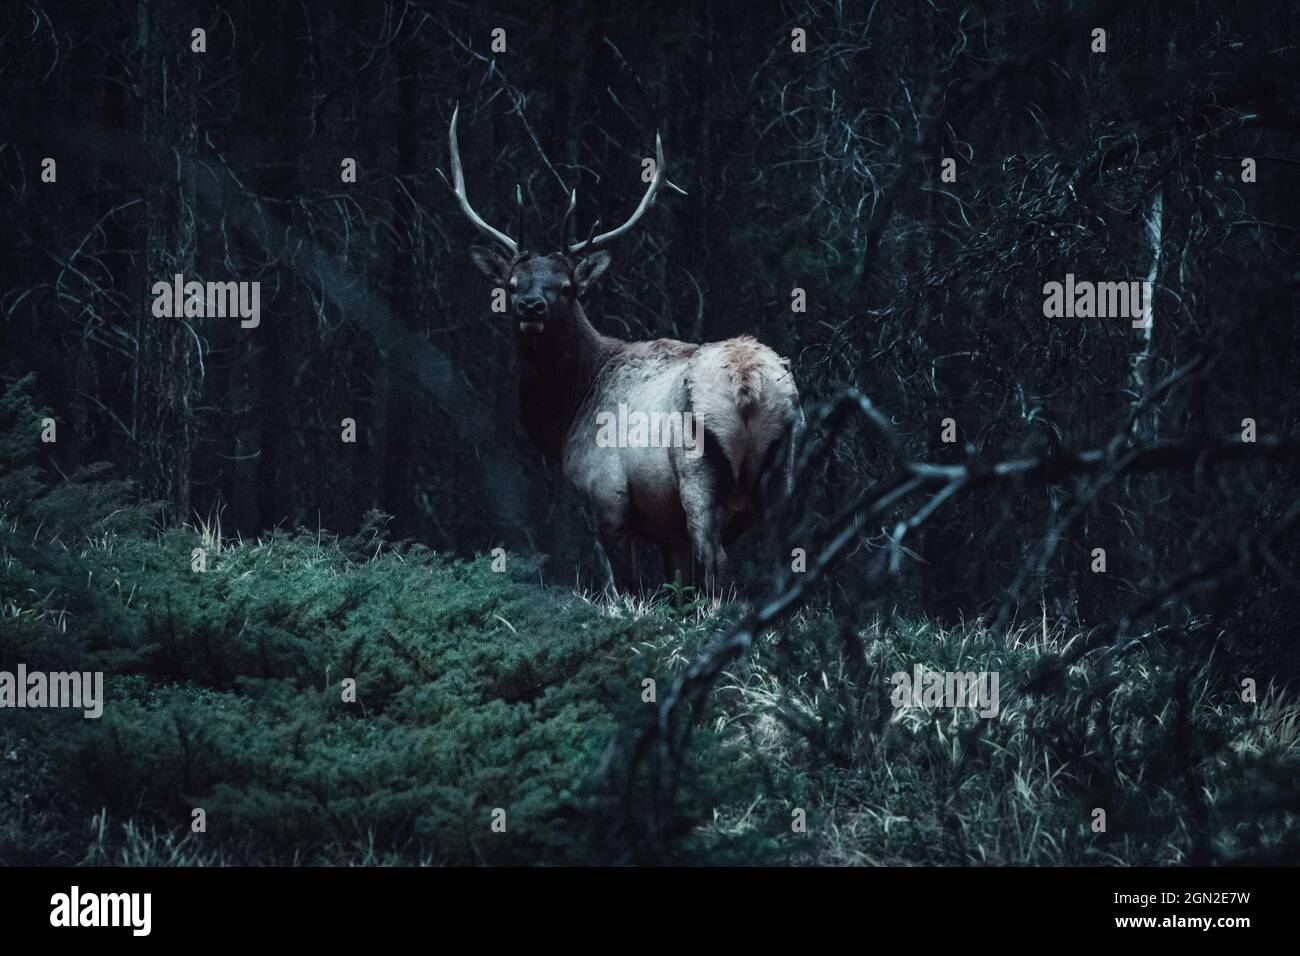 CANADA, ALBERTA, BANFF PARK. A SPINNING ELK (CERVUS CANADENSIS) IN THE UNDERGROWTH AT DUSK Stock Photo